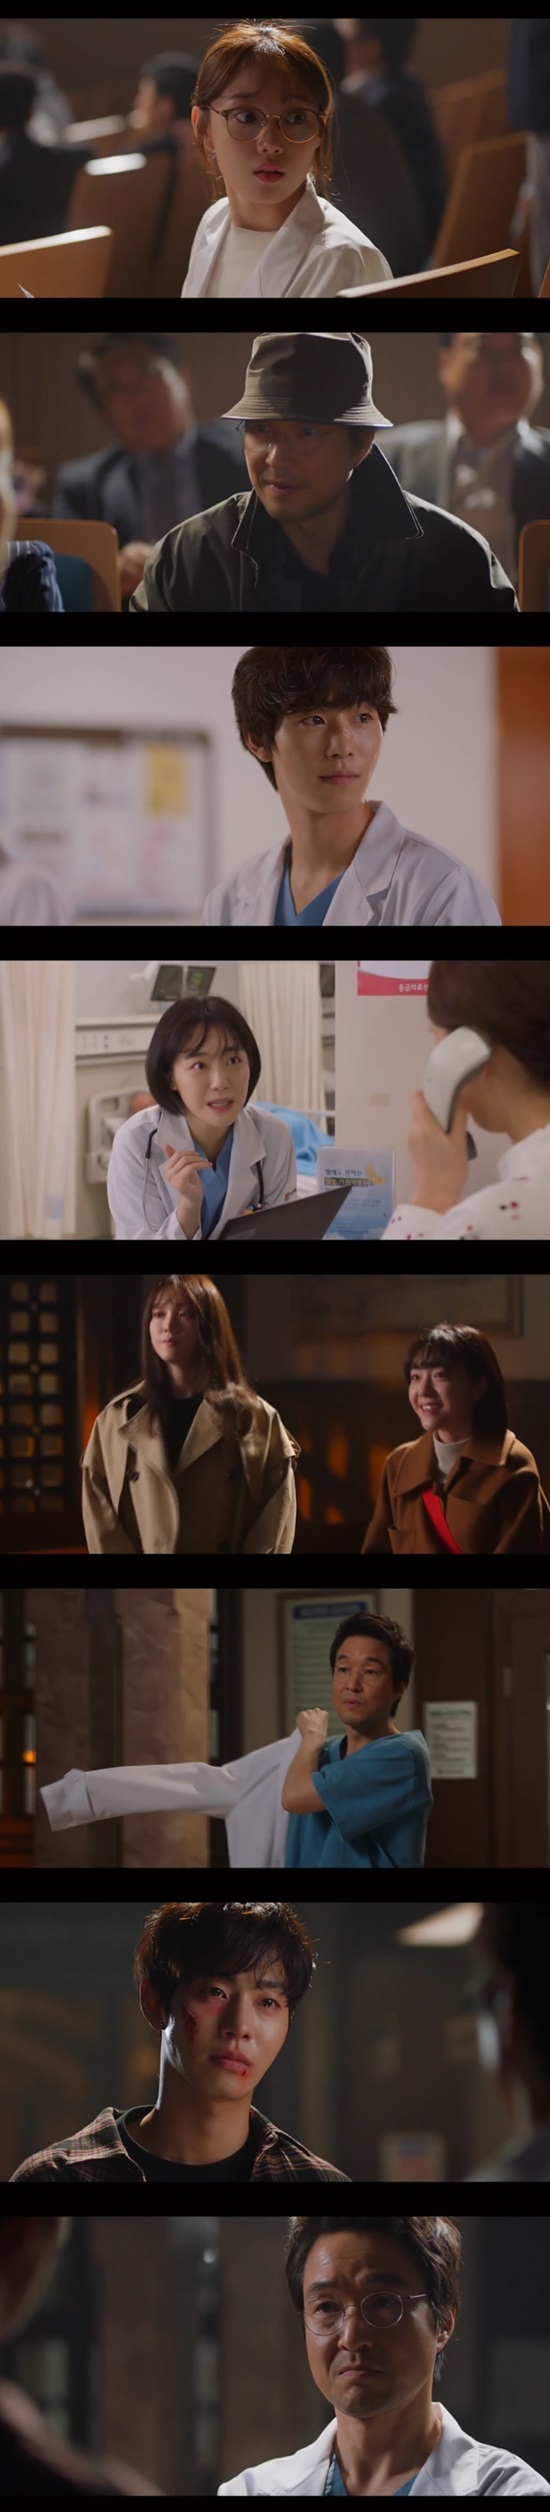 Ahn Hyo-seop Lee Sung-kyung Soju-yeon met Han Suk-kyu and entered the stone wall Hospital.In the first episode of SBSs Romantic Doctor Kim Sabu 2 broadcast on January 6 (playplay by Kang Eun-kyung/directed by Yoo In-sik Lee Gil-bok), a meeting between Kim Sabu (Han Suk-kyu) and young doctors was drawn.Kim visited the giant Hospital and watched the live sushi, and when he saw the patient falling into Danger, he borrowed paper and pen from Cha Eun-jae (Lee Sung-kyung) and delivered a note to the operating room.Kim Sabu recognized the fact that he was a tense pneumothorax, and Cha Eun-jae wondered how Kim Sabu recognized it at once when the patient lived as Kim Sabu said.Seo Woo Jin (Ahn Hyo-seop) worked at the construction site and encountered a man on the subway coming to Hospital, and when the man showed abnormal symptoms, he contacted Baro 119 and came to Hospital together.Yun Are-um (Sho Ju-yeon) found out that Seo Woo Jin was the new PayDoctor, and soon the reunion of Seo Woo Jin and Cha Eun-jae implied the past history of the two.In the past, Seo Woo Jin and Cha Eun Jae had a nervous battle as rivals.Cha Eun-jae asked, Did not you go to Hyun Juns Hospital as soon as you got a board to receive a billion-dollar salary? Seo Woo Jin responded, Did not you hear the rumor?Cha Eun-jae knew that Seo Woo Jin was working at a senior hospital and was properly shot and shot by the hospital corruption.Kim was helping the emergency room and first met Yun Are-um, and heard rumors of a whistleblower for Seo Woo Jin.Cha Eun-jae asked Kim Sabu, who met again in the emergency room, about the pneumothorax patient, but Kim Sabu said, How can I not do my job and eat dog shit like this?Cha Eun-jae was surprised by Kims vitriol, and when he entered the operating room, he was nervous about taking medicine.Kim Sabu watched the operation of Seo Woo Jin and saw Cha Eun-jae fall in the operating room.Seo Woo Jin remembered the tears of Cha Eun-jae after she collapsed vomiting during anatomy practice session in the past.Cha had to choose suspension and dispatching a branch stone wall for the fall, and reluctantly went to the stone wall.There was a Yun Are-um who came to the stone wall himself.A traffic accident patient arrived near the scene, and Kim went into Baro surgery, and Cha Eun-jae and Yun Are-um waited for the operation to end.Seo Woo Jin was chased by debtors and headed for the stone wall.Just as Cha Eun-jae and Yun Are-um were about to greet Kim Sabu, who had finished the operation, Seo Woo Jin came in and said, Do you need a job? I need money.How much can you give me?Yoo Gyeong-sang